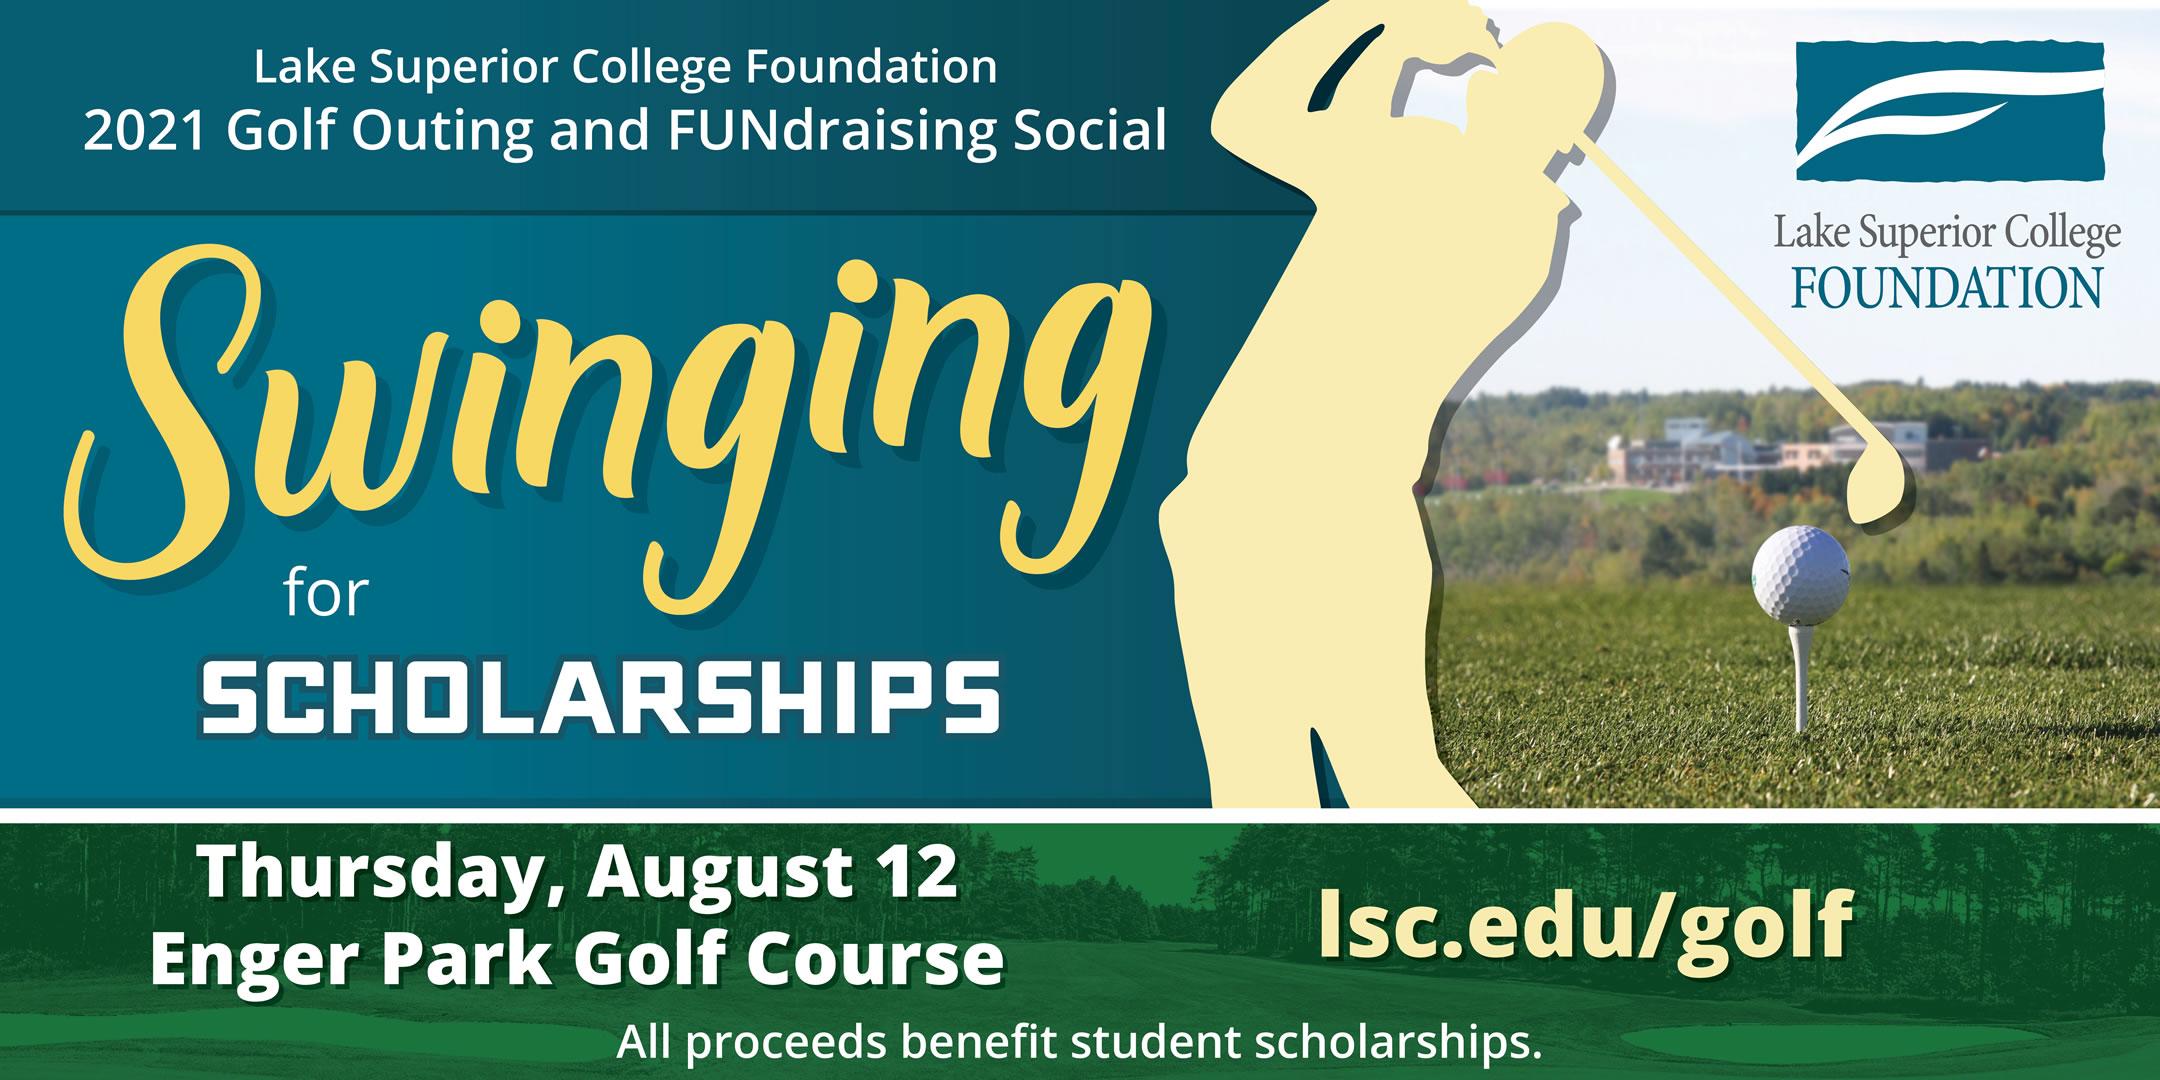 LSC Foundation 2021 Golf Outing: Swinging for Scholarships